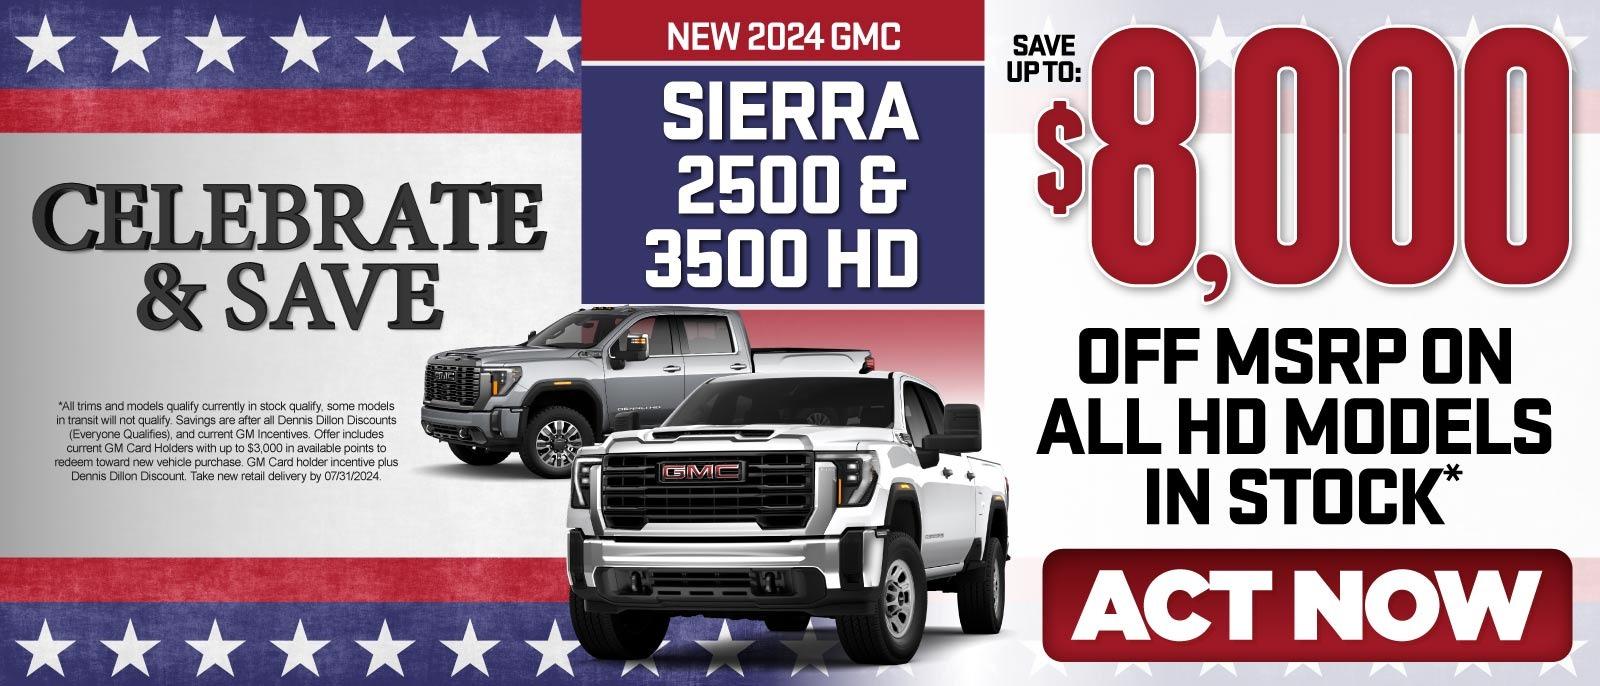 New 2024 GMC Sierra 2500 & 3500 HD | Save Up To: $8,000 Off MSRP On All HD Models In Stock* — Act Now